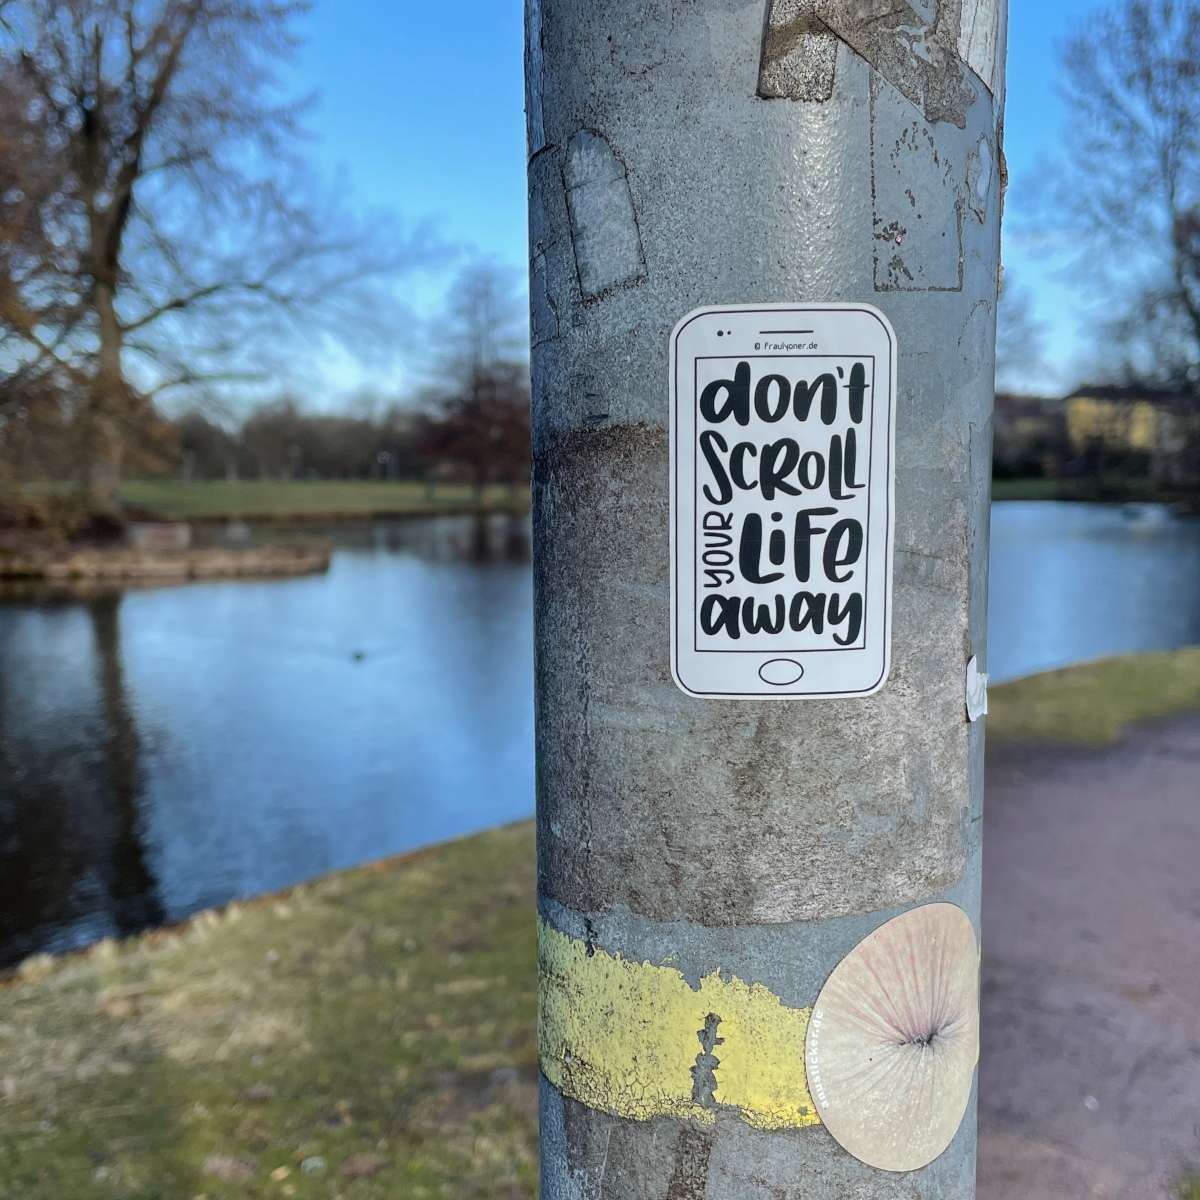 Don't scroll your life away – als Sticker